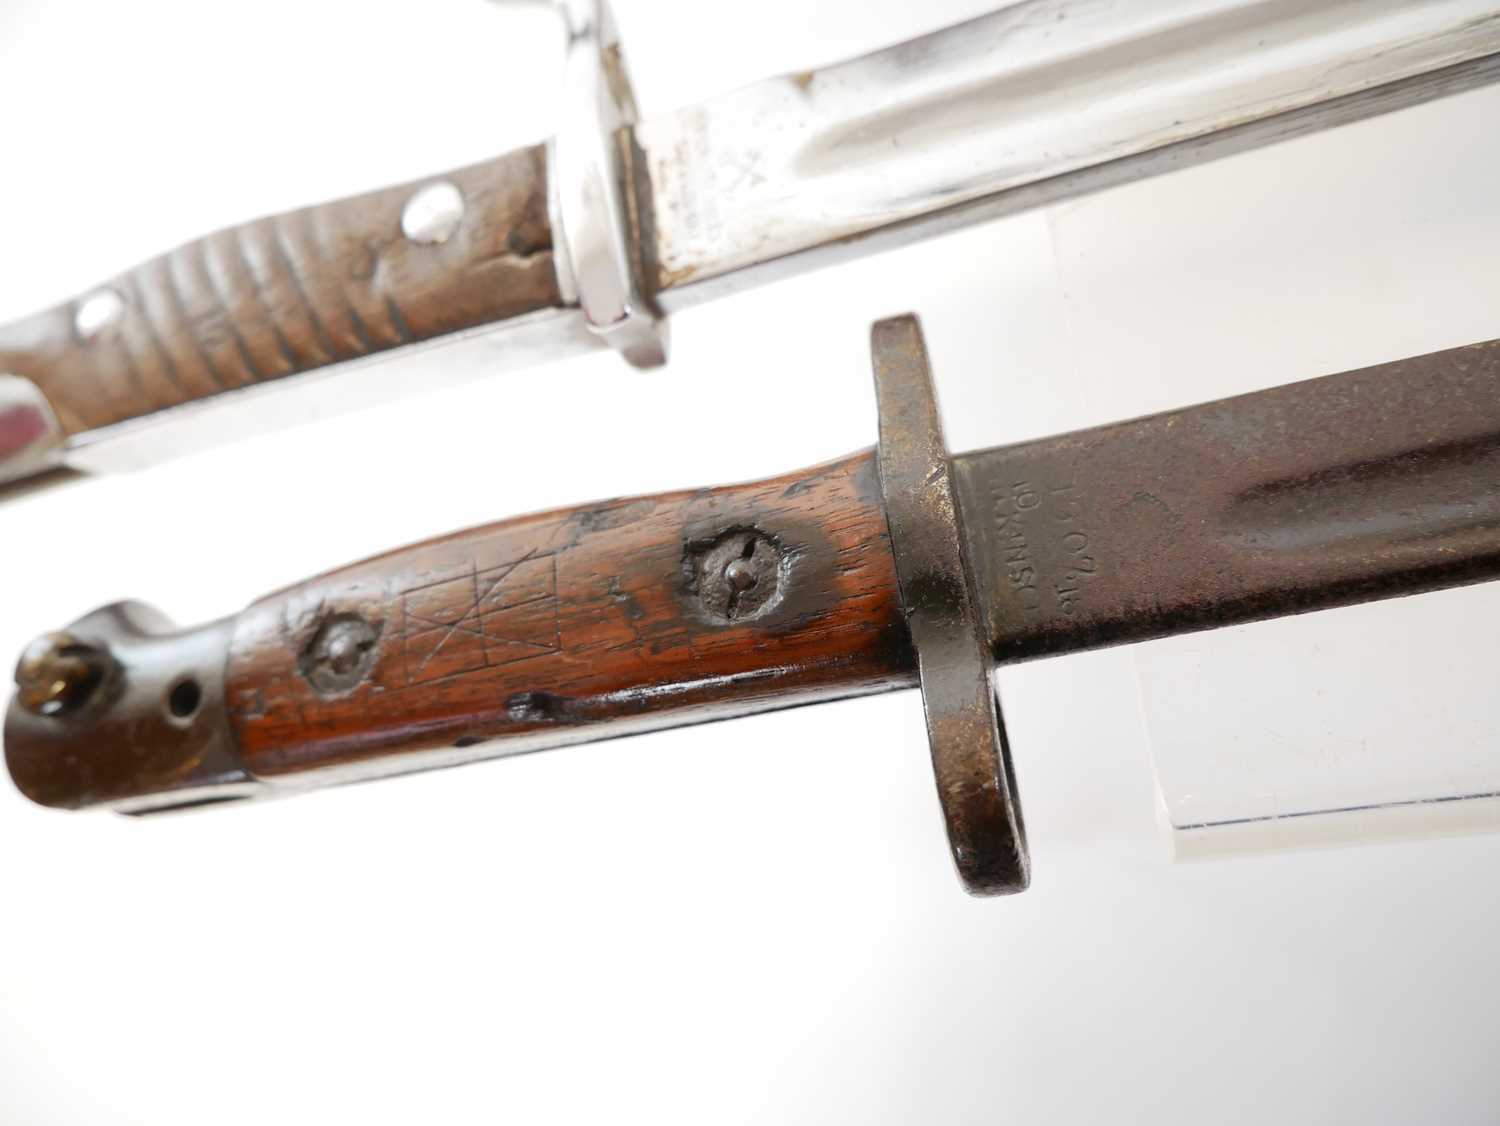 German Mauser S.98 / 05 Butcher Bayonet and scabbard, by Fichel & Sachs Schweinfurt, a Chassepot M. - Image 9 of 11